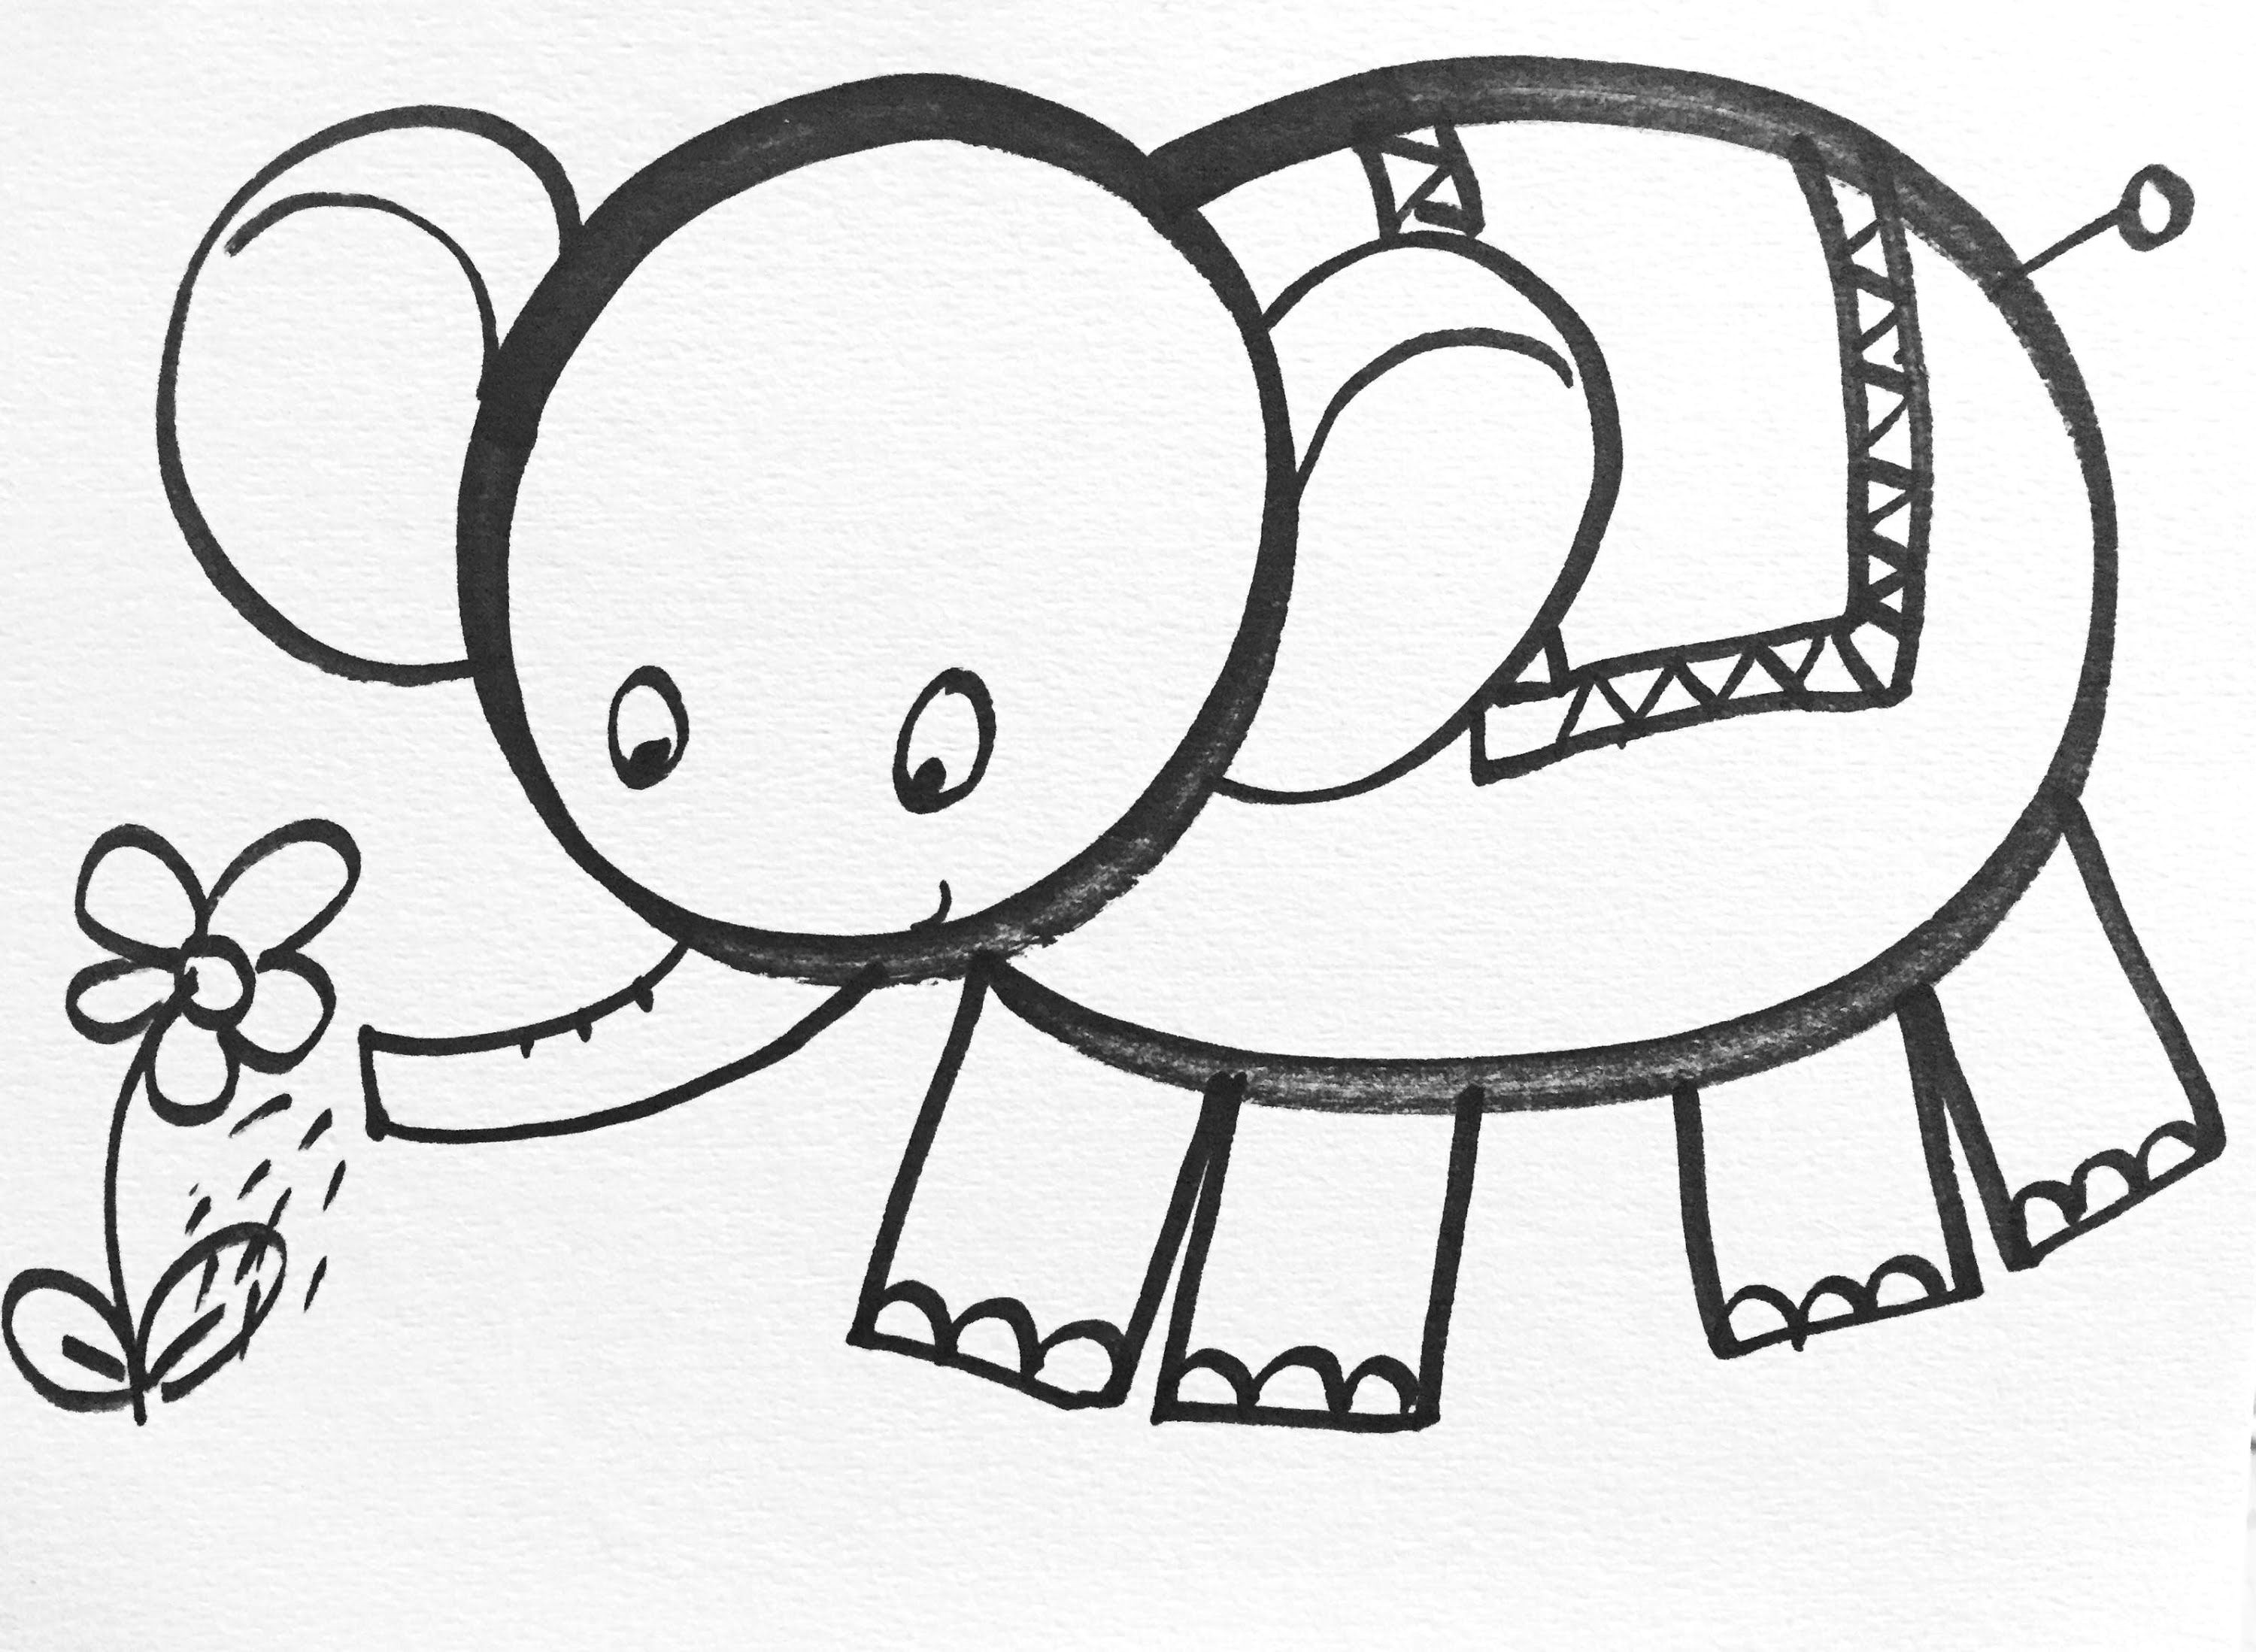 Drawing A Cartoon Elephant Learn How to Draw Easy In This Drawing You Can Learn to Draw the